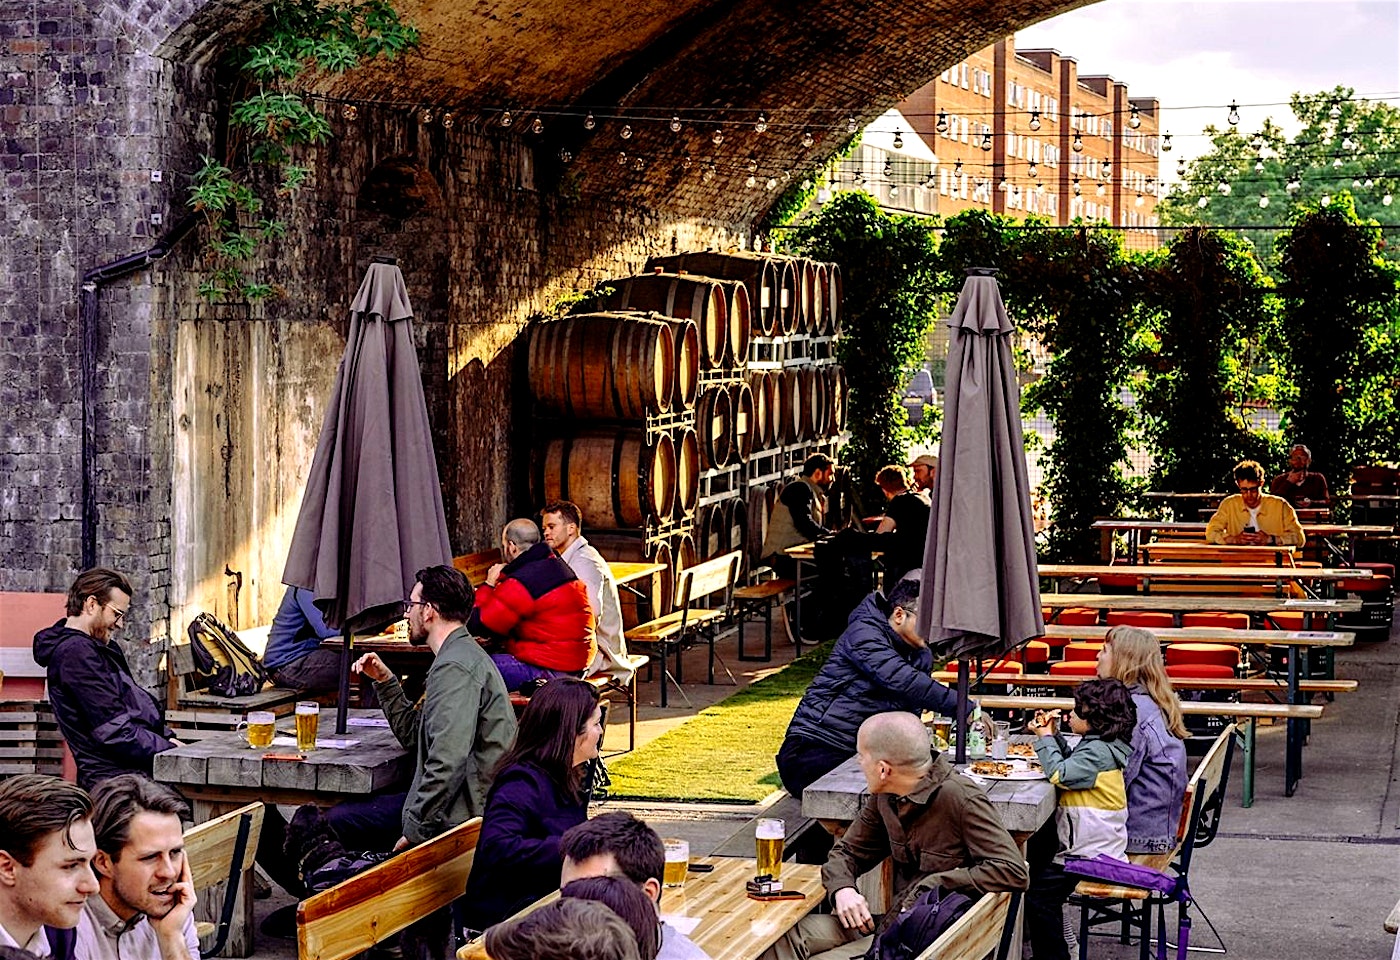 The Five Points Brewing Co., Christmas venue in London